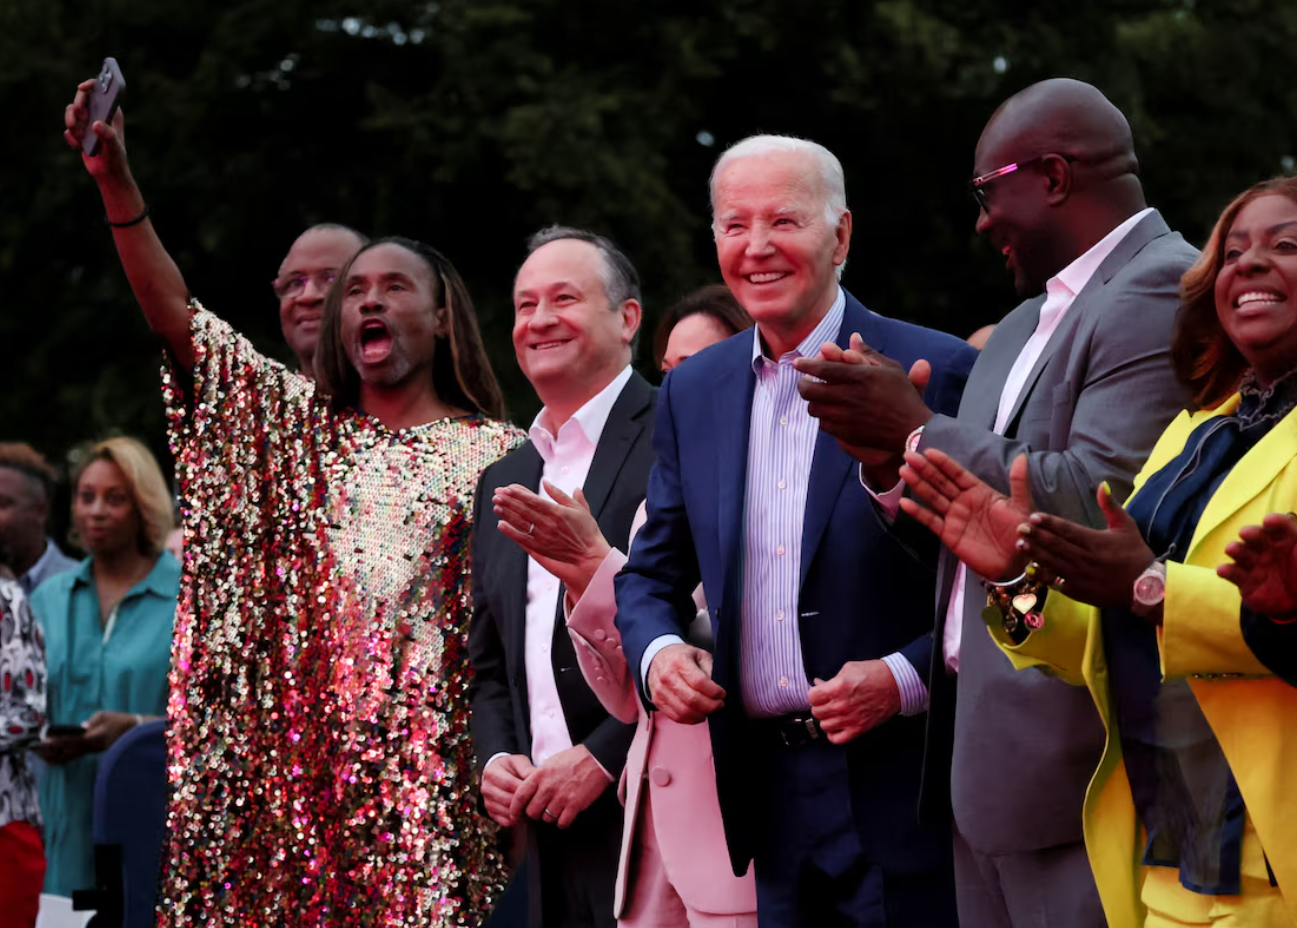 Biden, in early Juneteenth party, vows to keep fighting for Black Americans’ freedoms